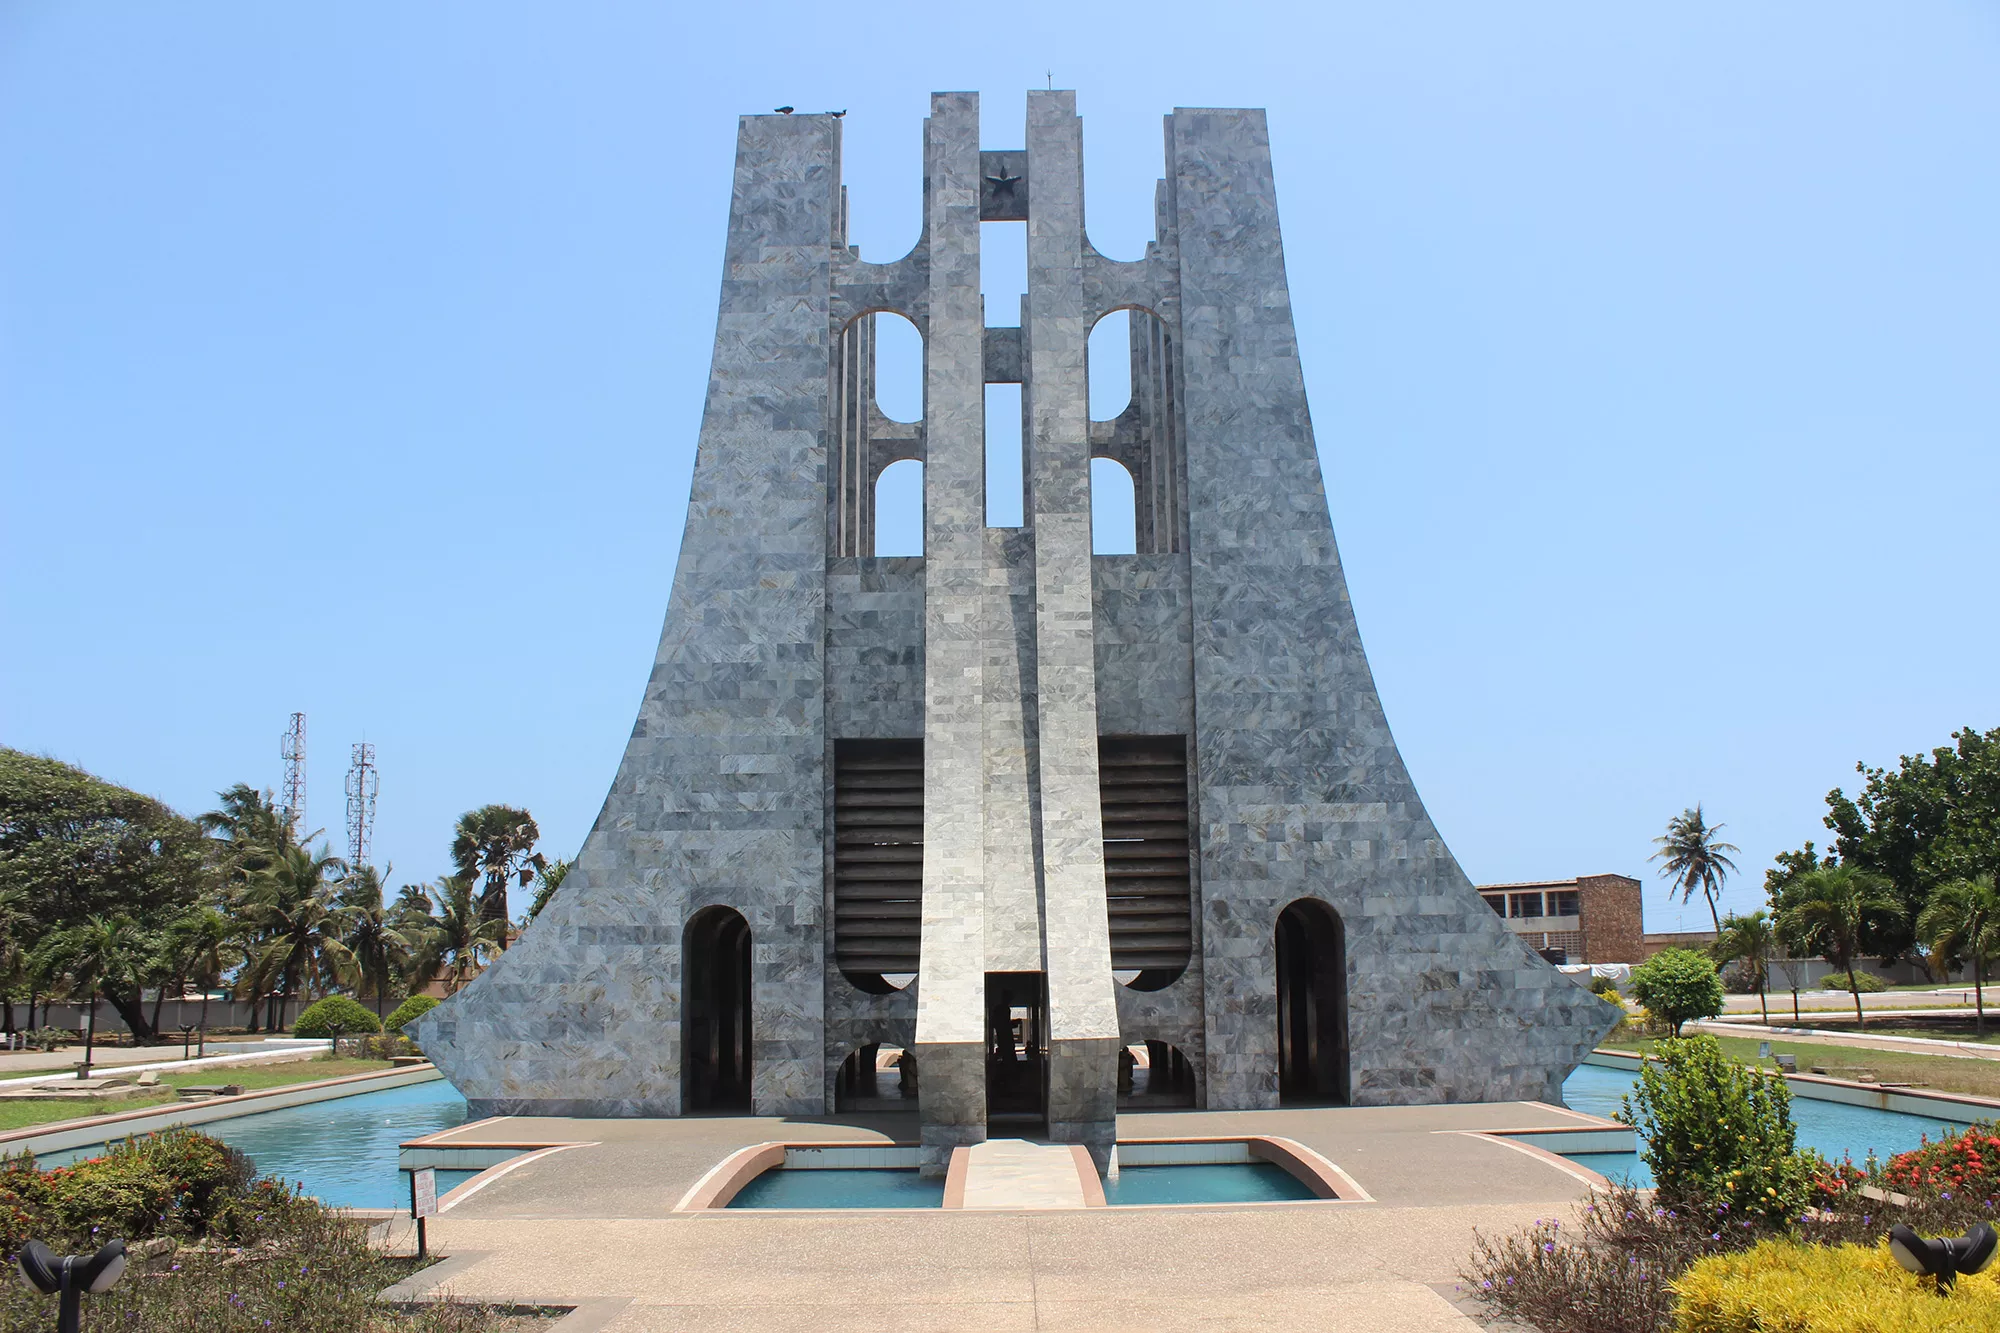 Kwame Nkrumah Mausoleum in Ghana, Africa | Museums,Architecture - Rated 3.5